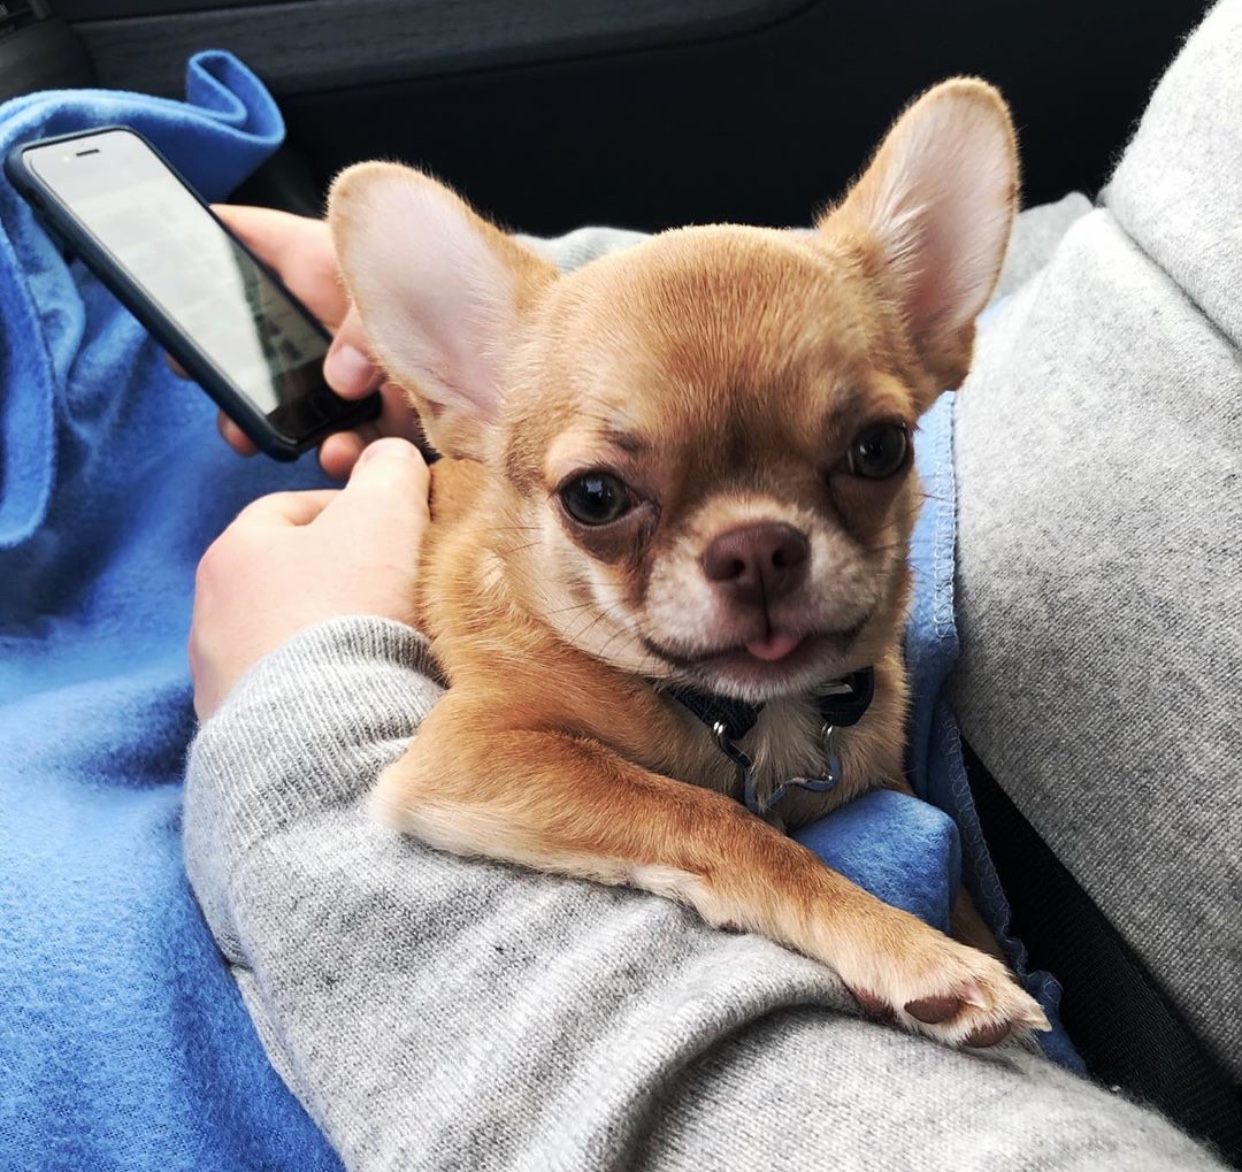 Chihuahua inside the car resting on its owner's lap